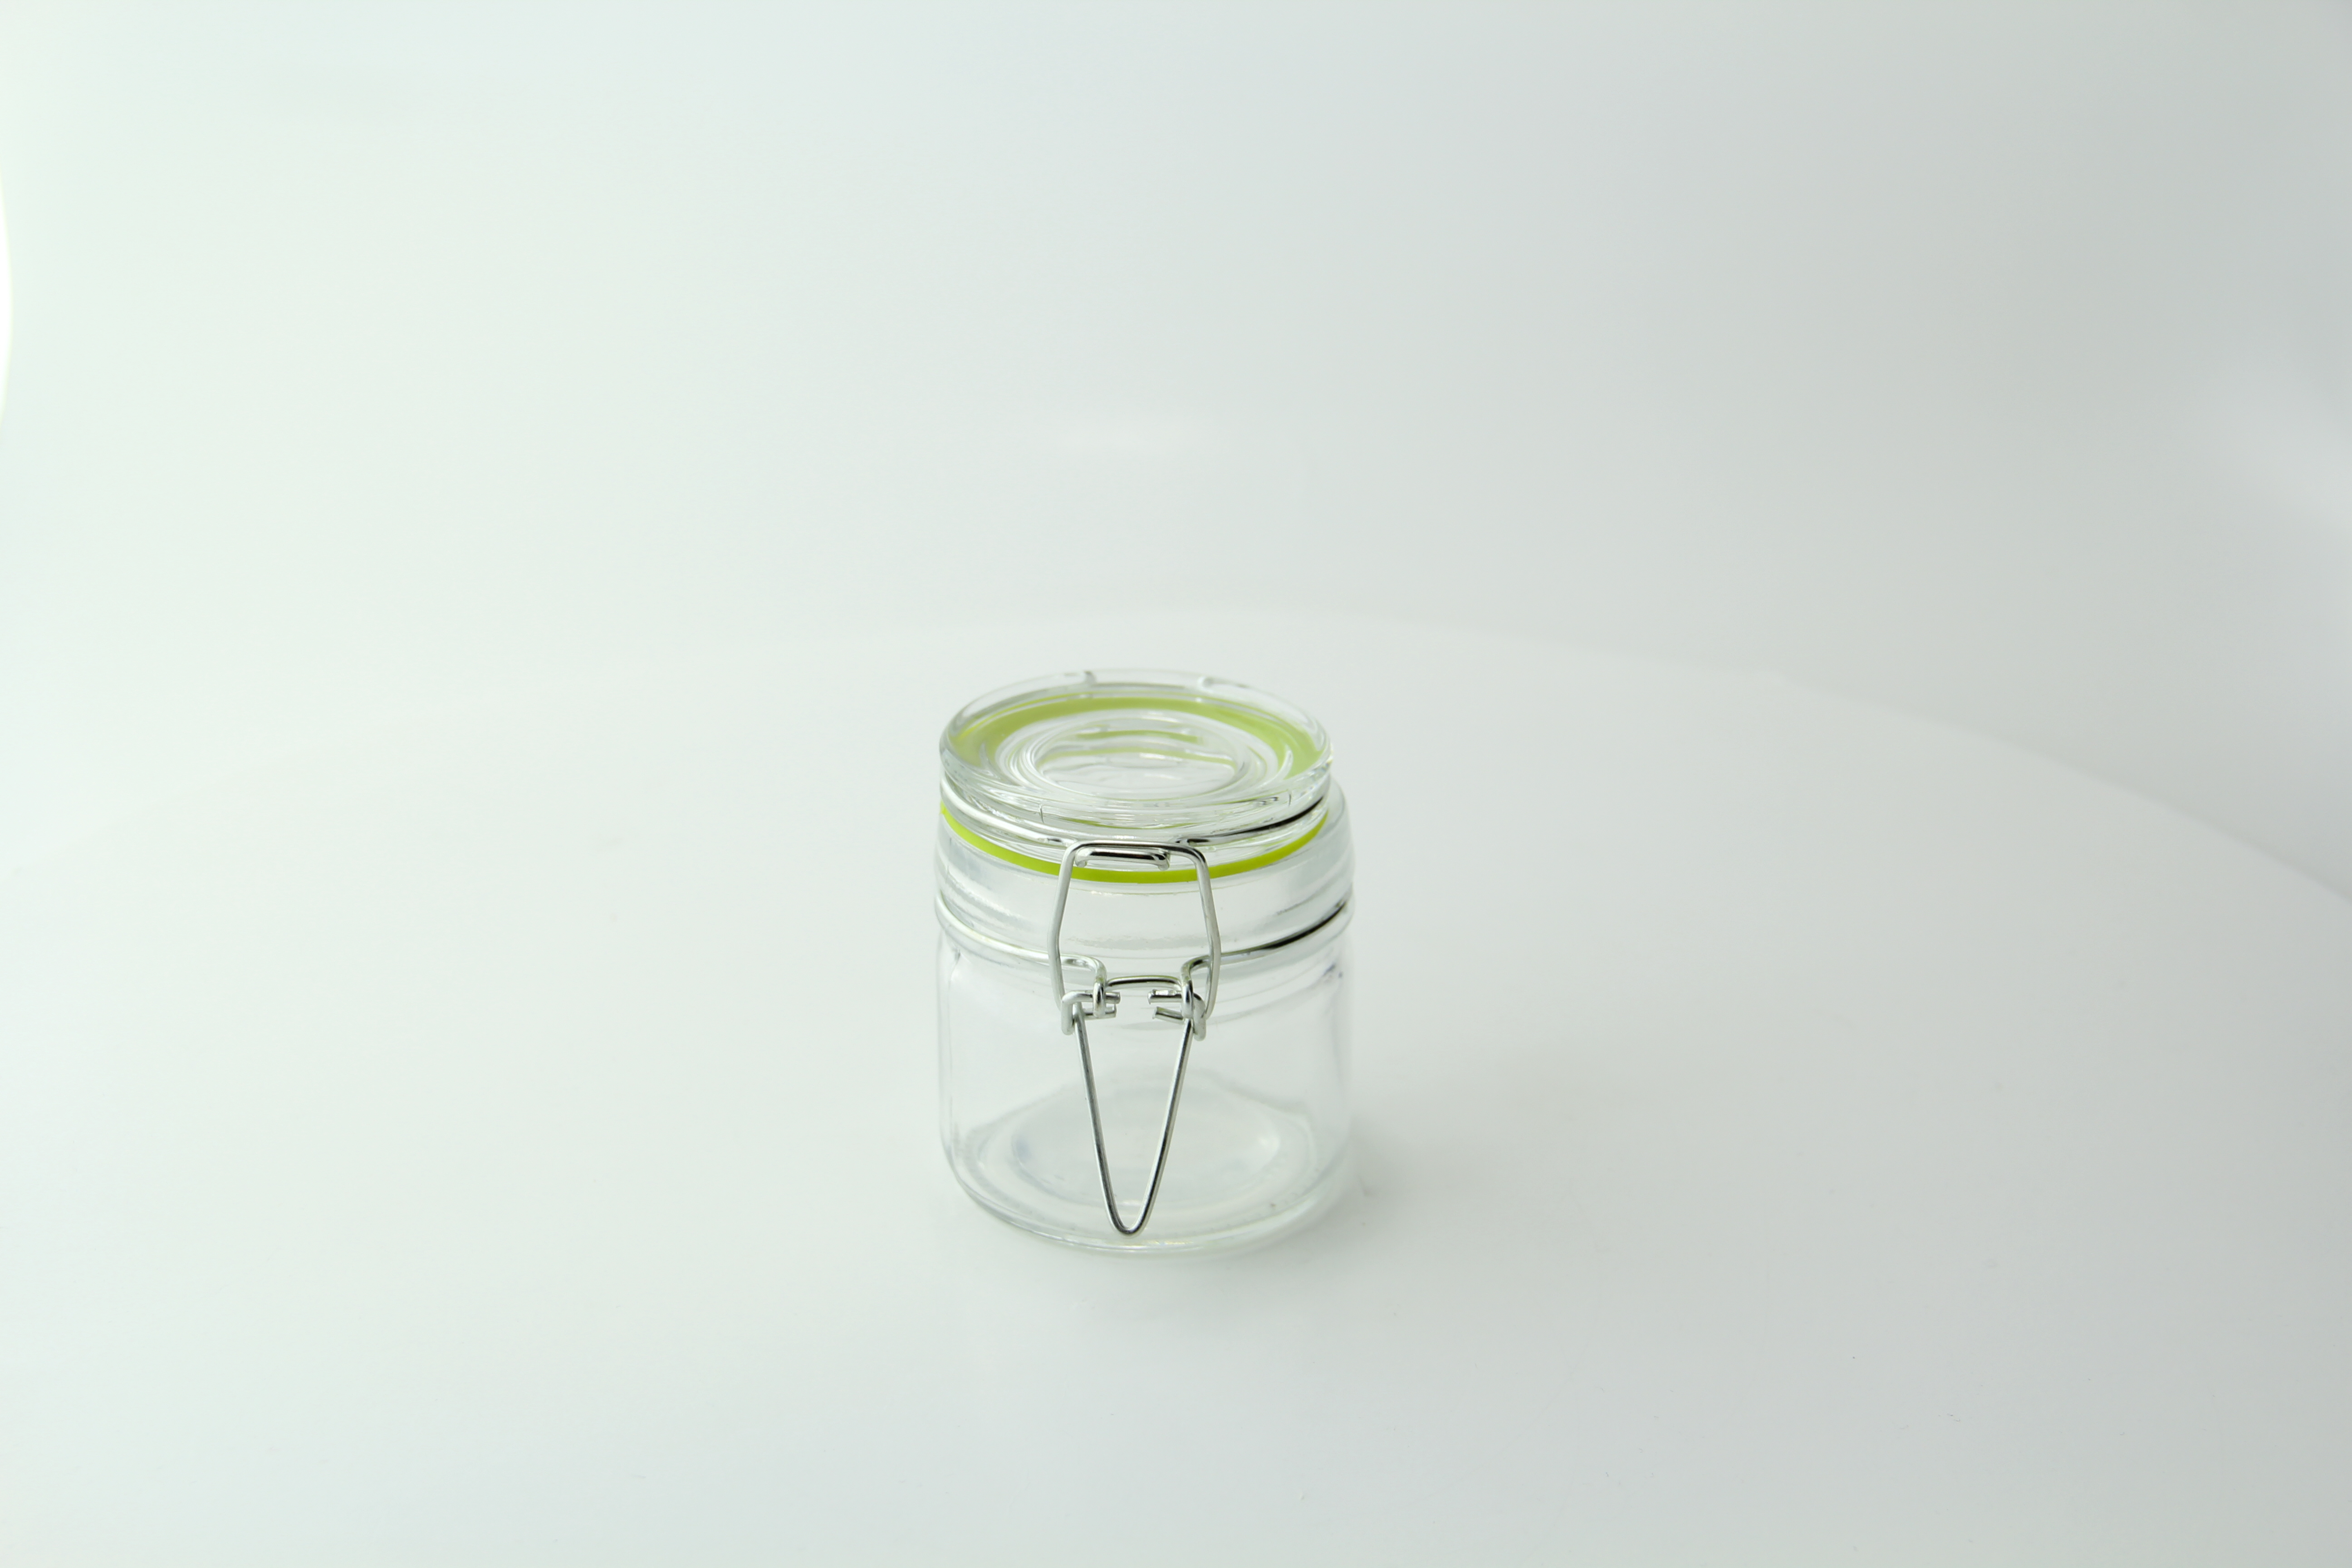 3 oz. Clear Travel Jar with Seal Insert